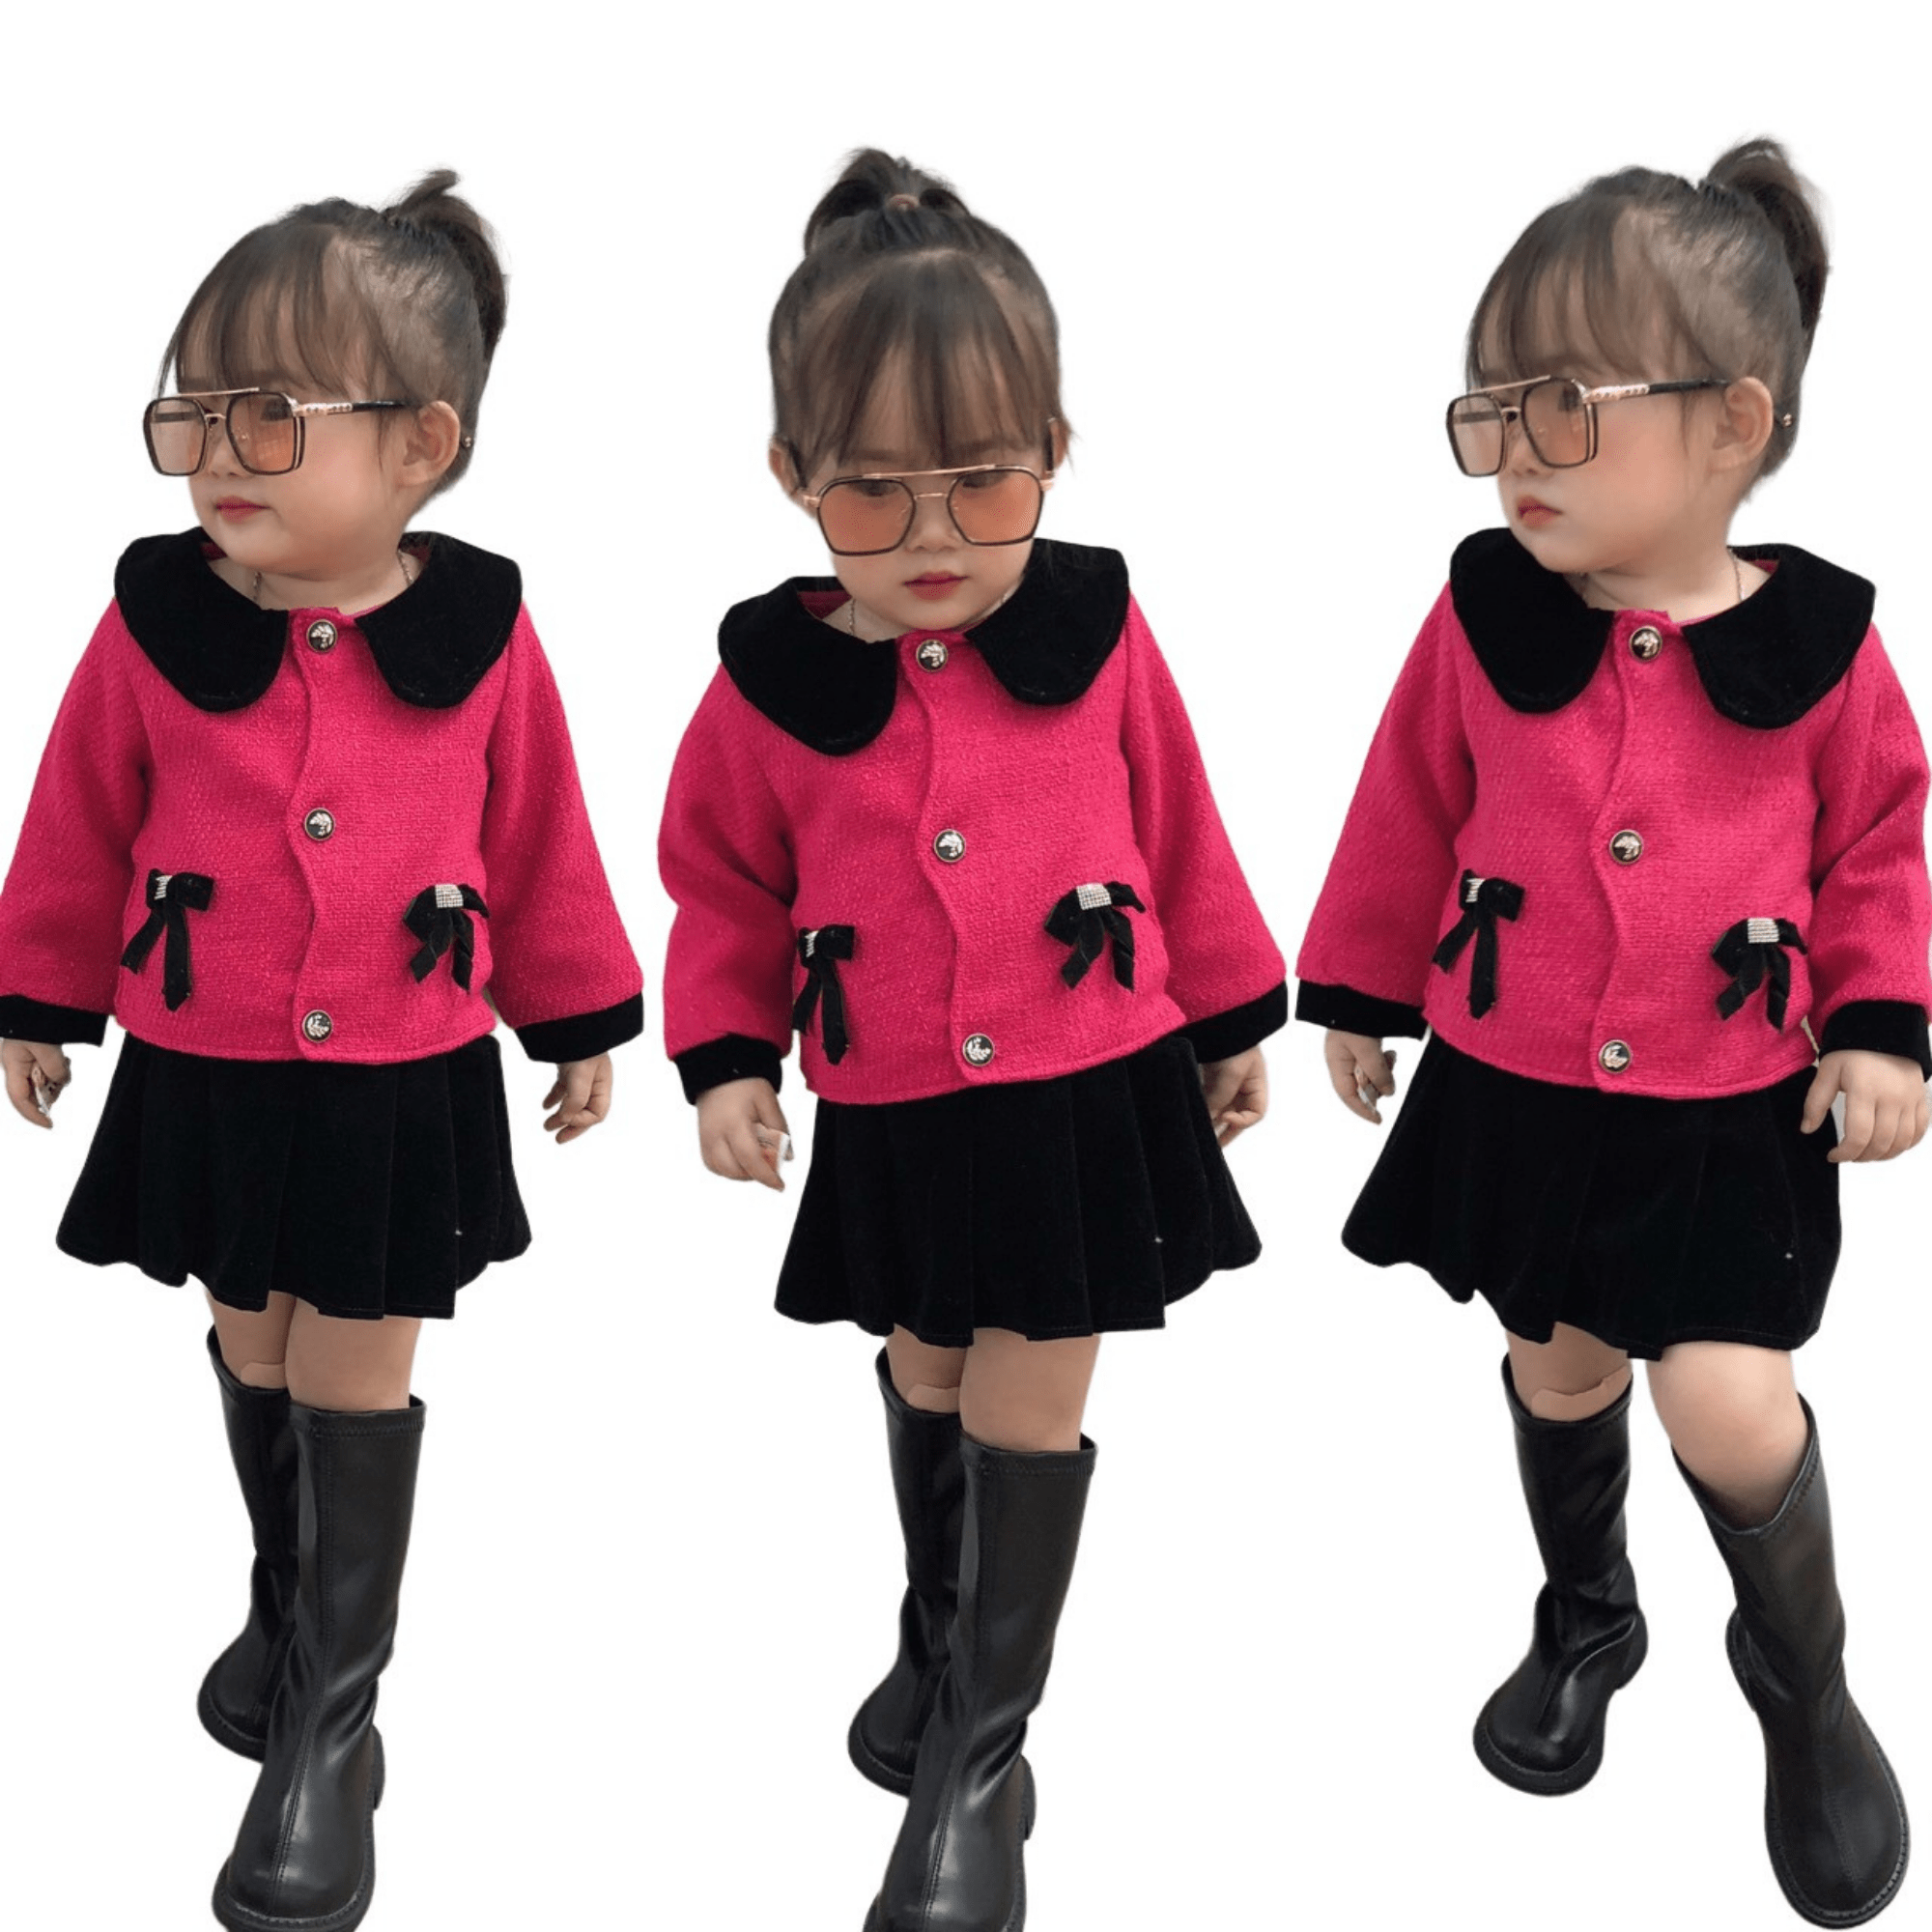 Wholesale Kids Clothes Customized Service Natural Dresses New Arrival Each One In Opp Bag From Vietnam Manufacturer 5